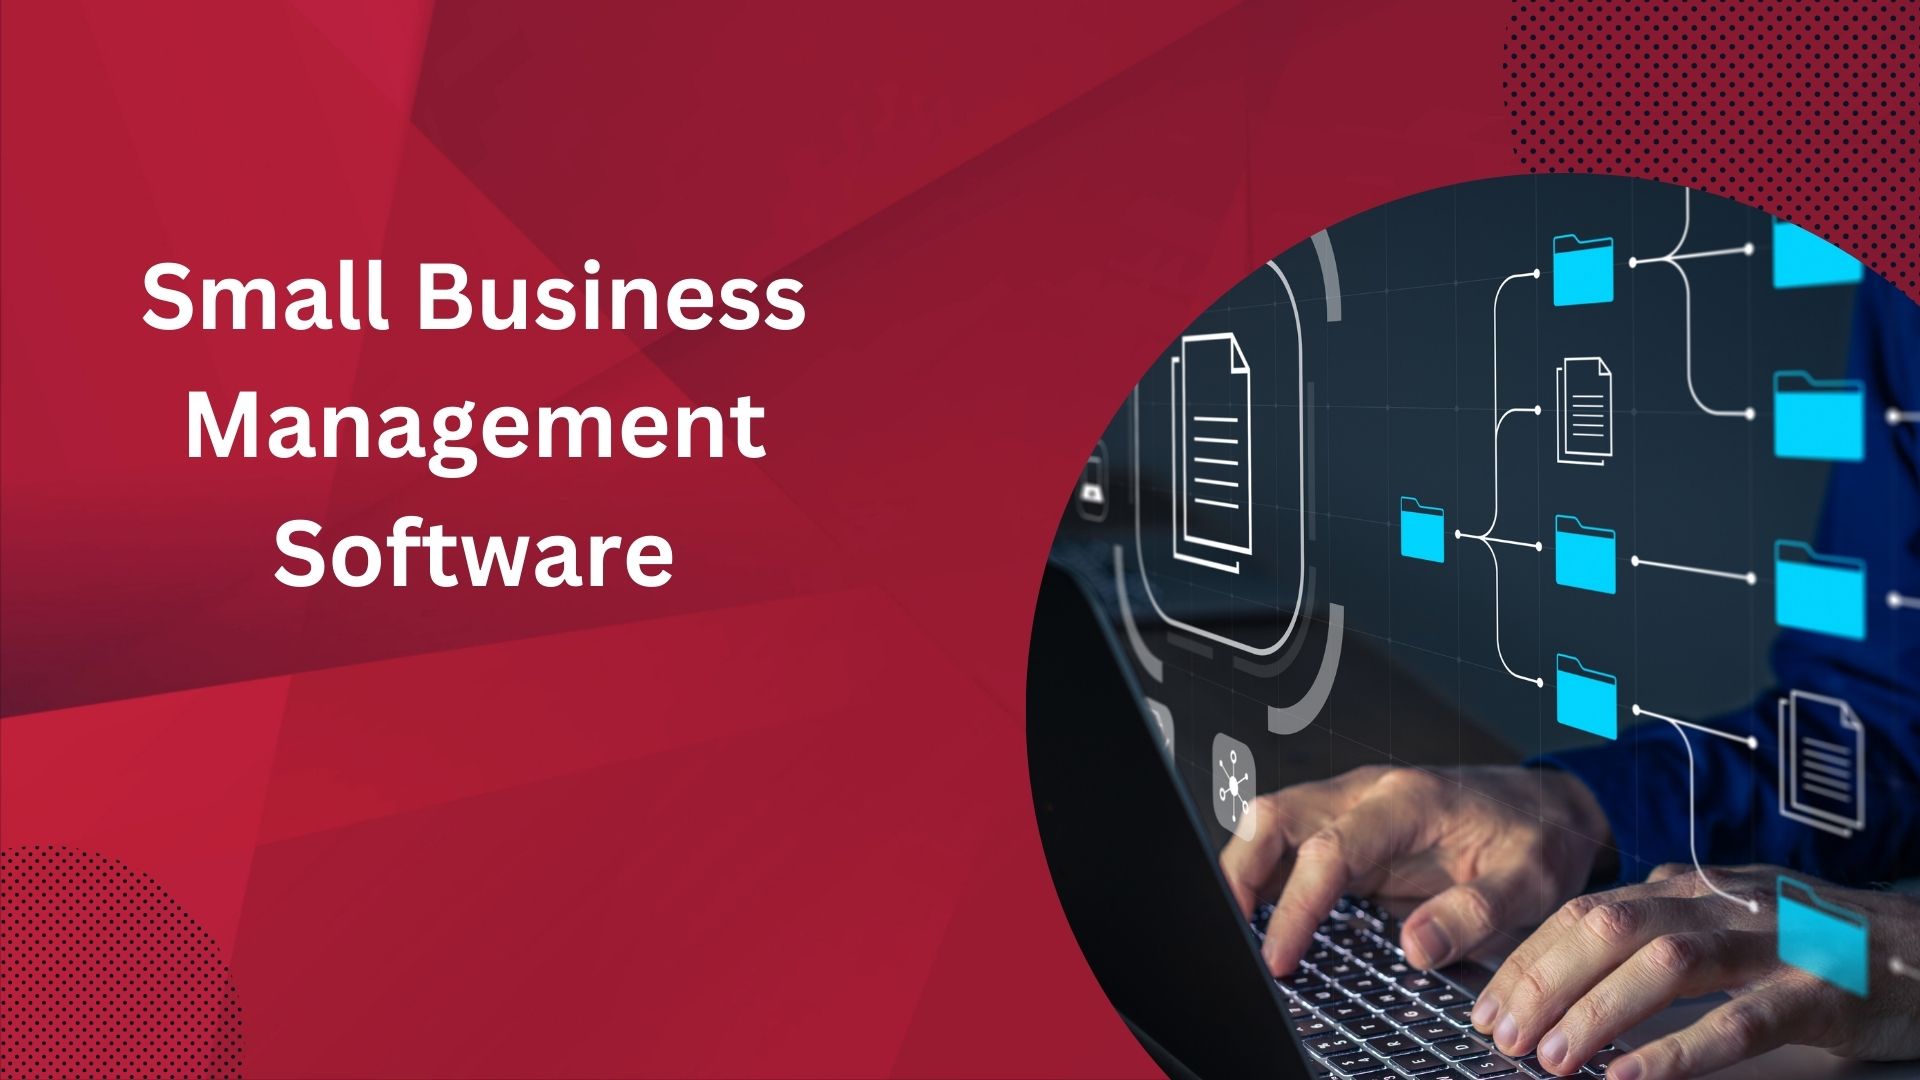 Small Business Management Software